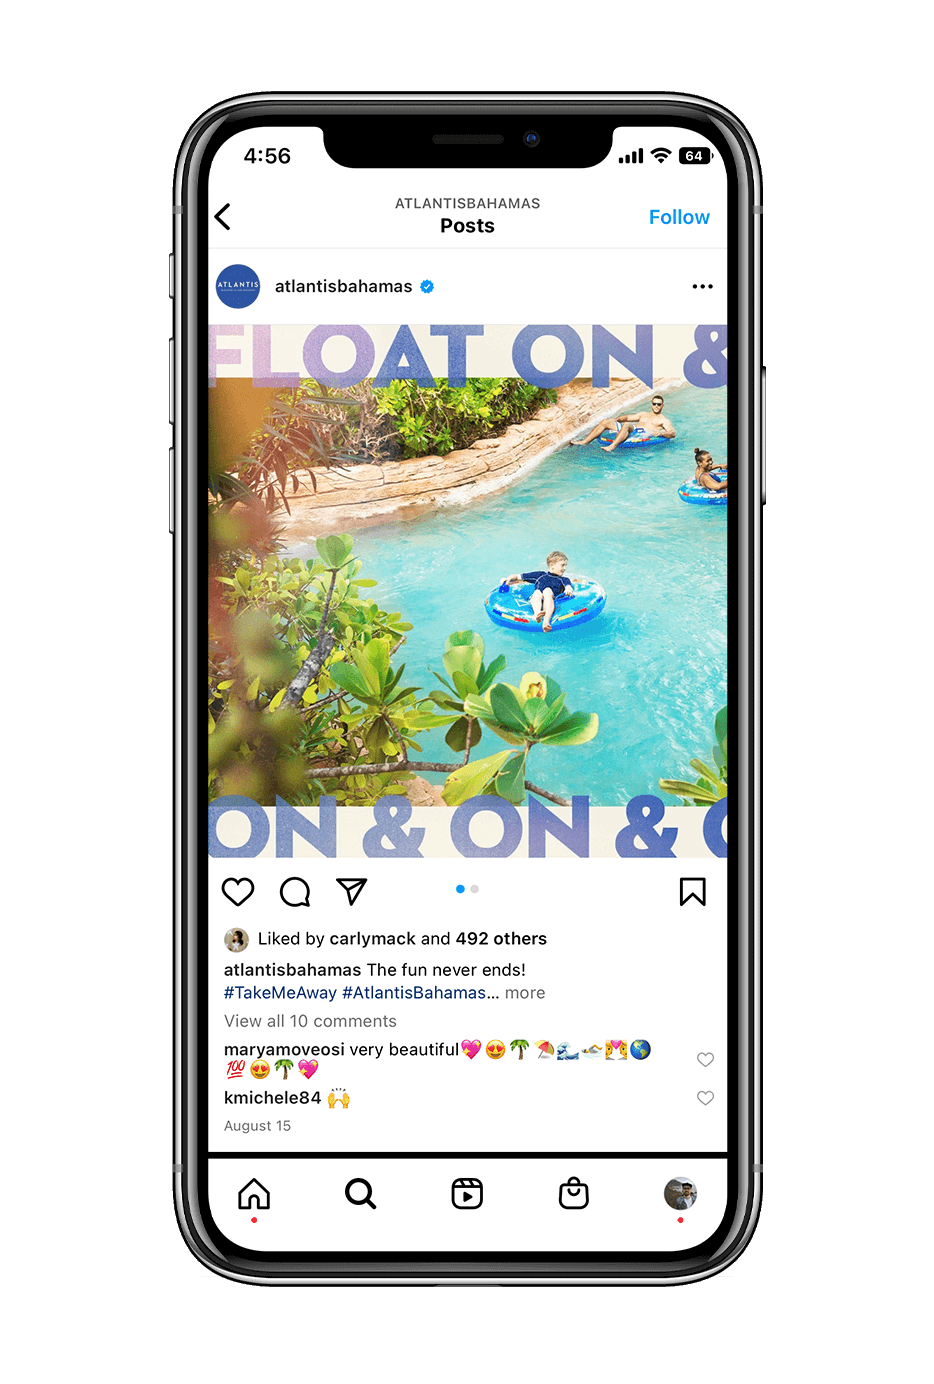 Mockup of iphone showing an example of an Atlantis Bahamas instagram post. The post reads 